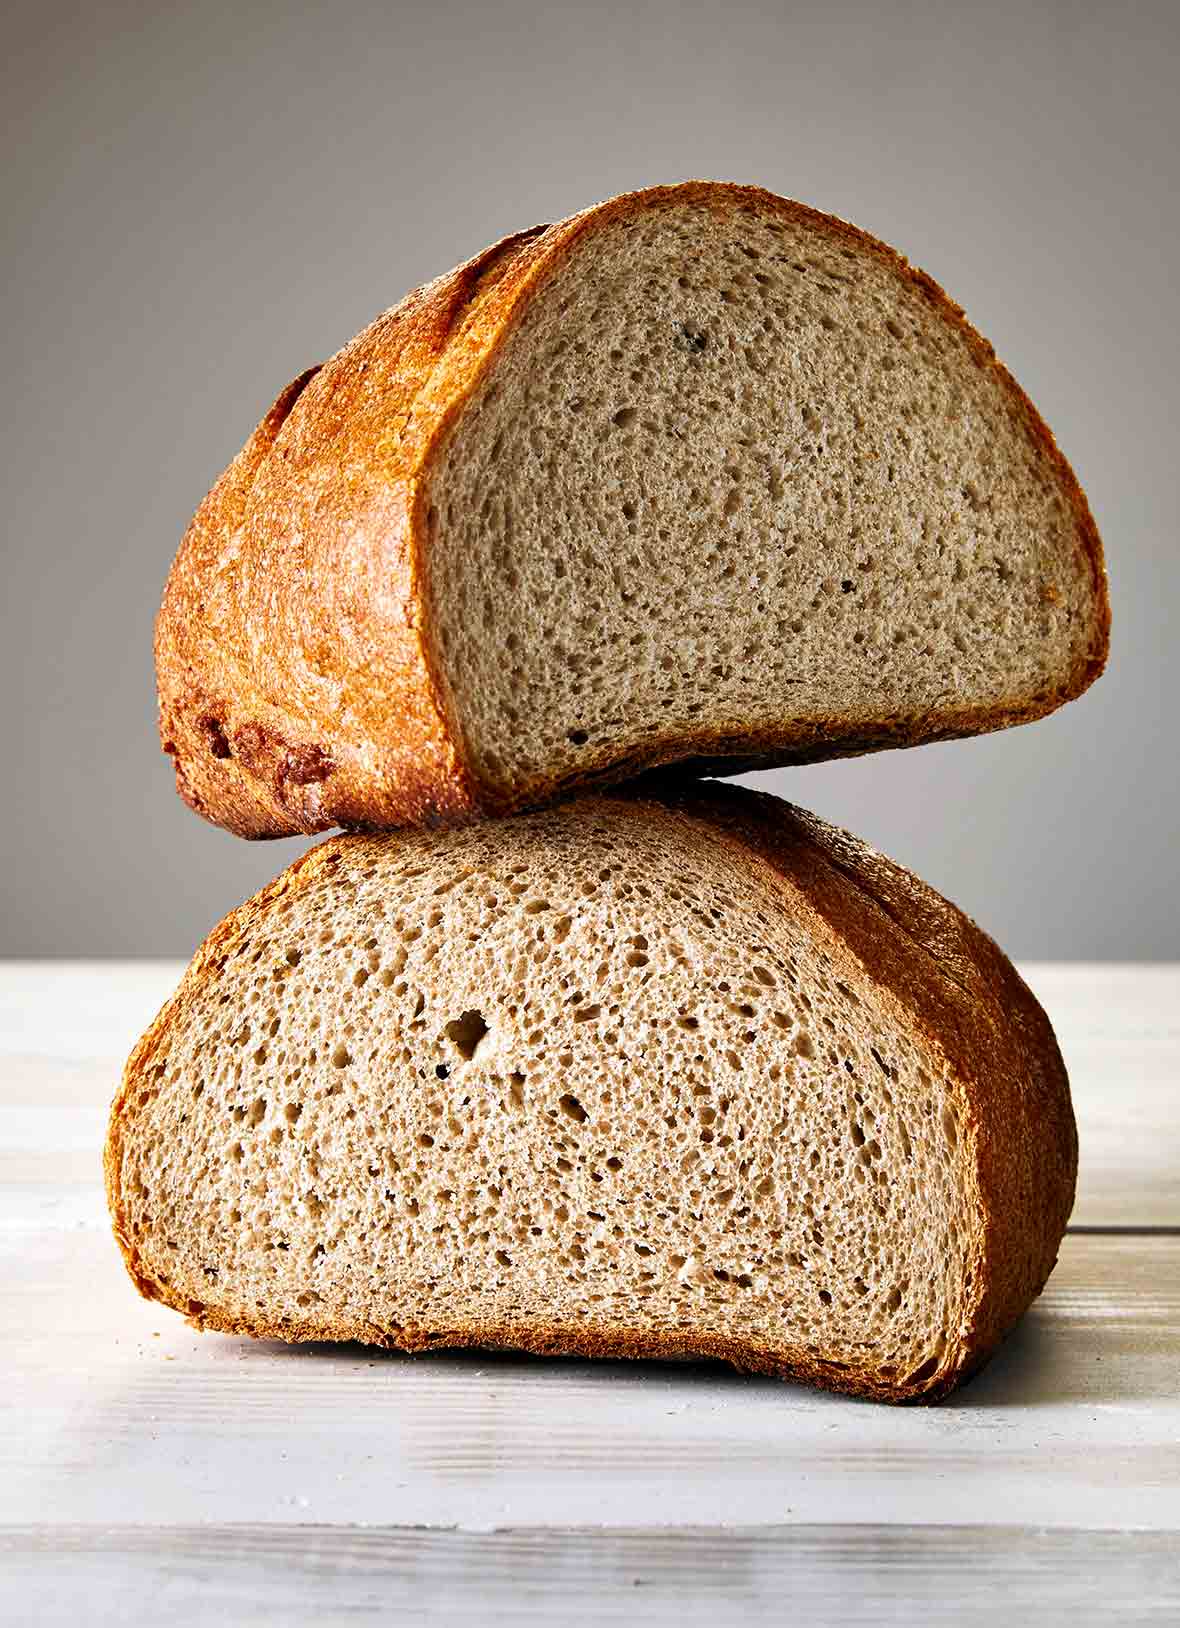 A loaf of Jewish rye bread, cur in half, one half balancing on the other